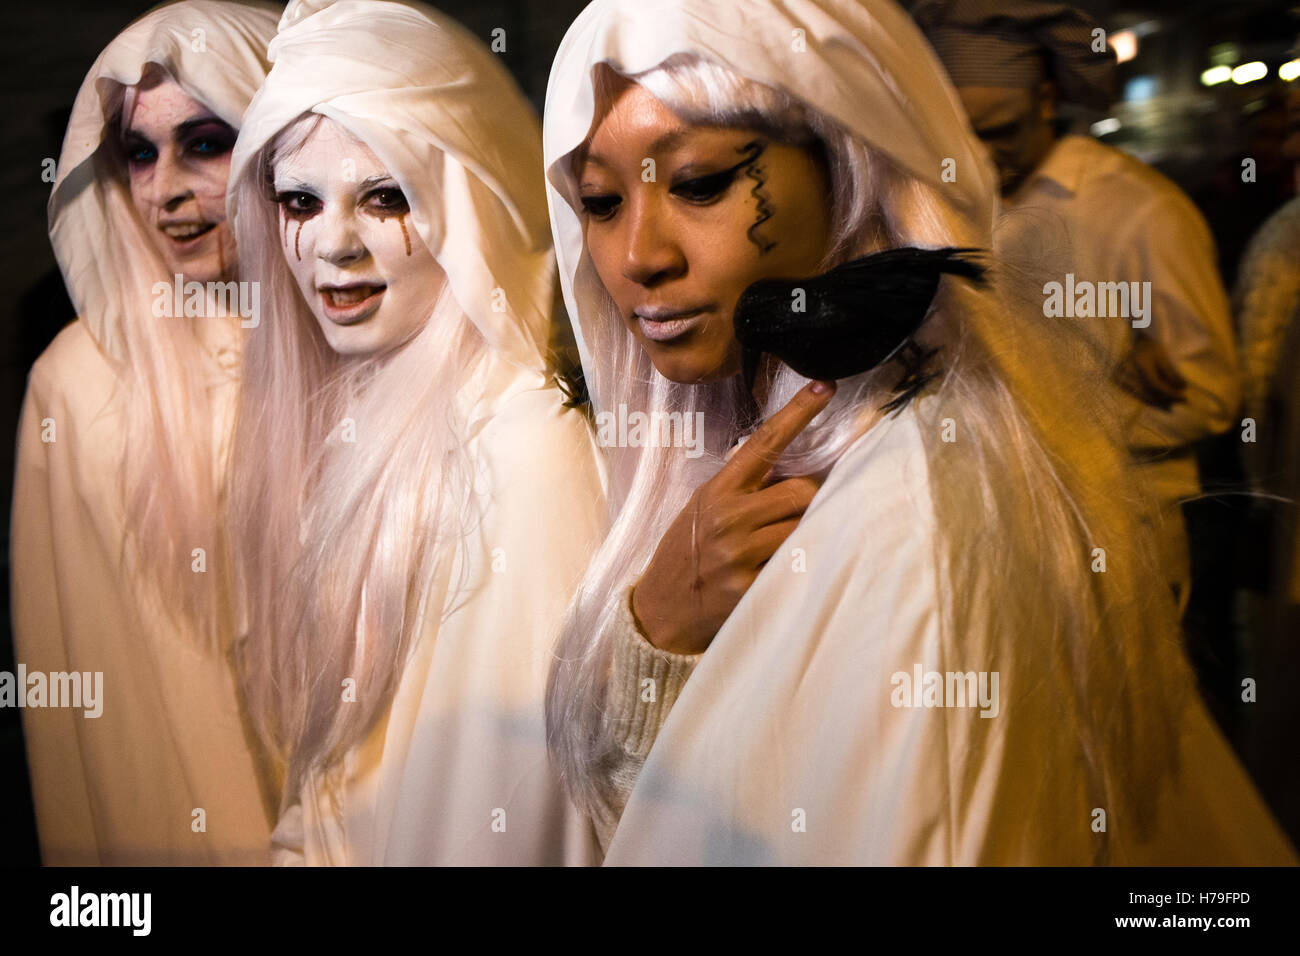 New York, NY - 31 October 2016. Three women with white hair wearing white outfits  in the Greenwich Village Halloween Parade. Stock Photo